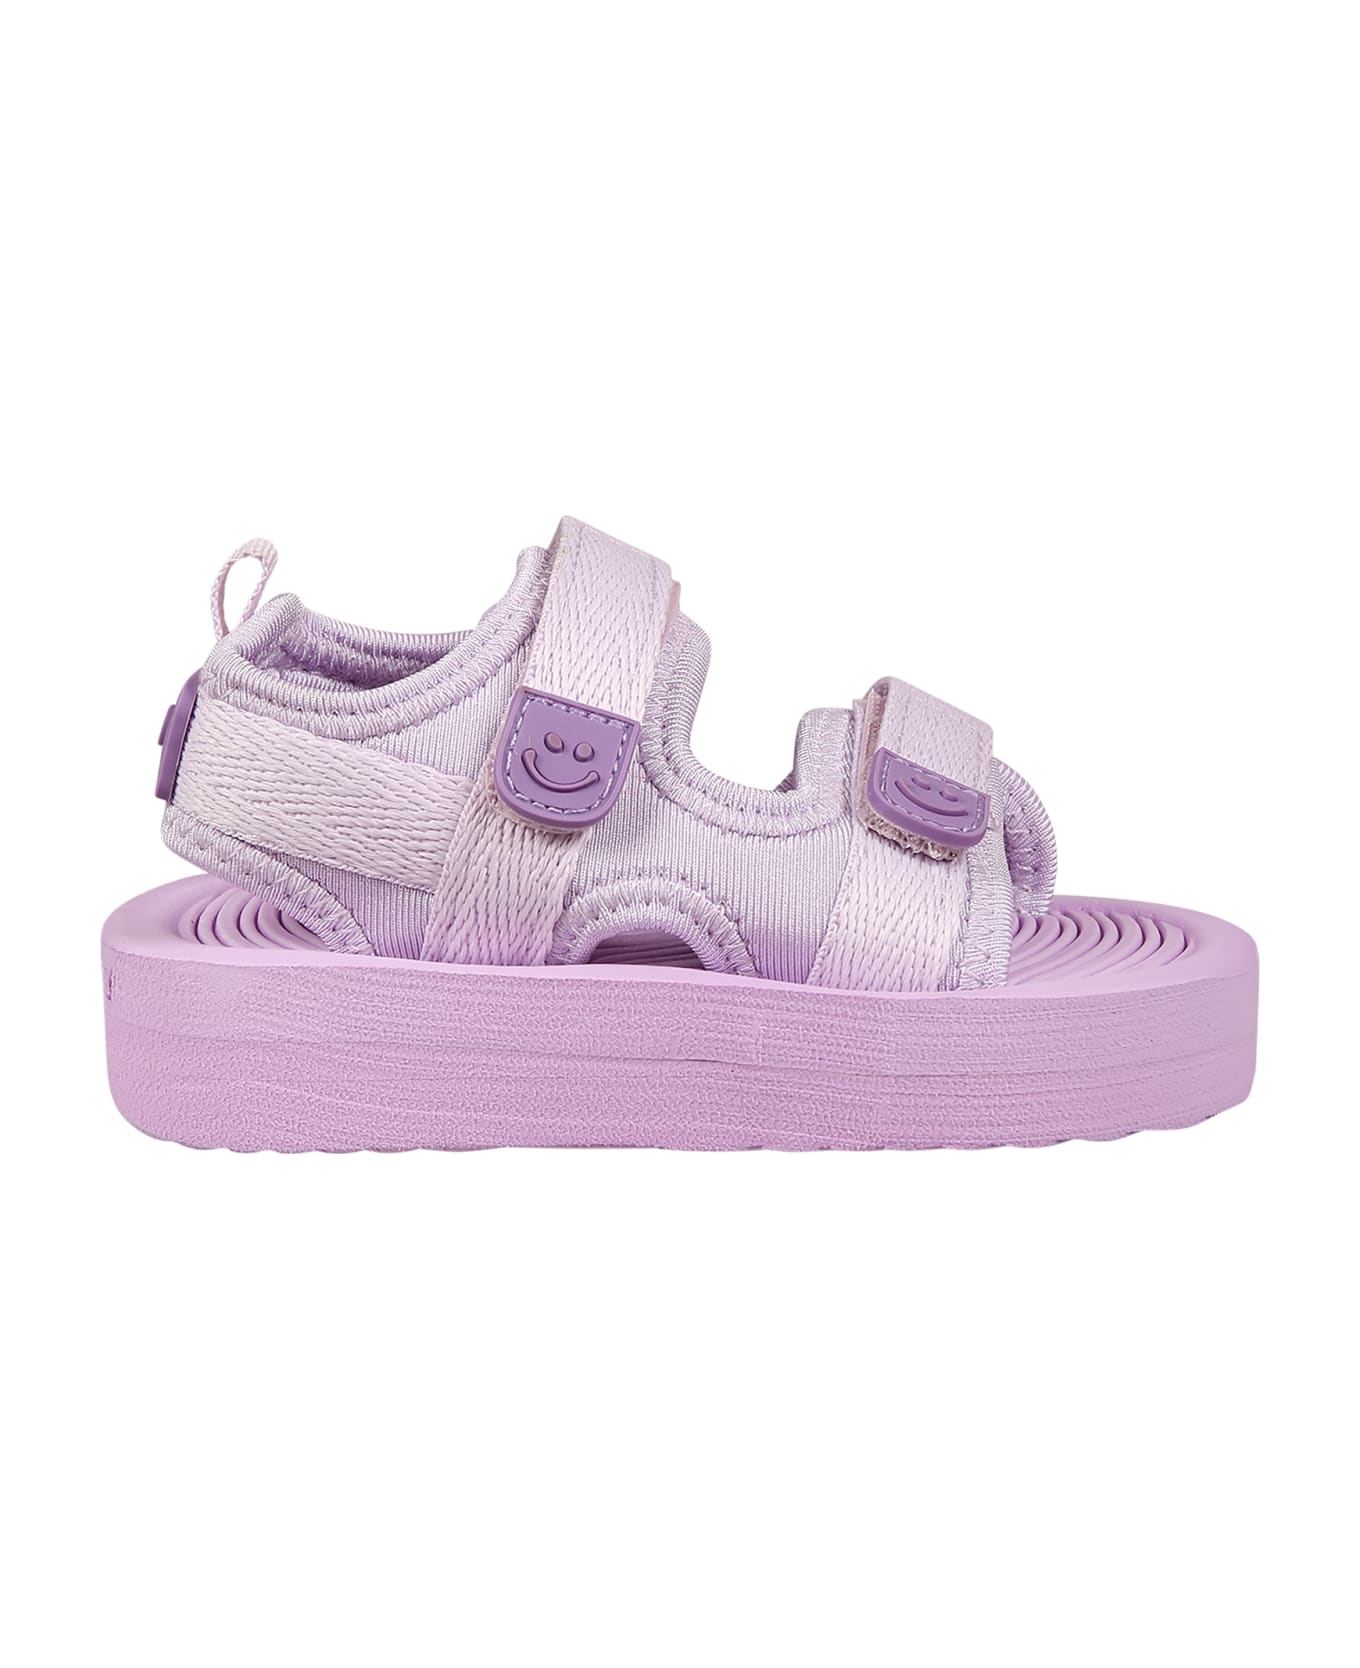 Molo Purple Sandals For Baby Girl With Logo - Violet シューズ